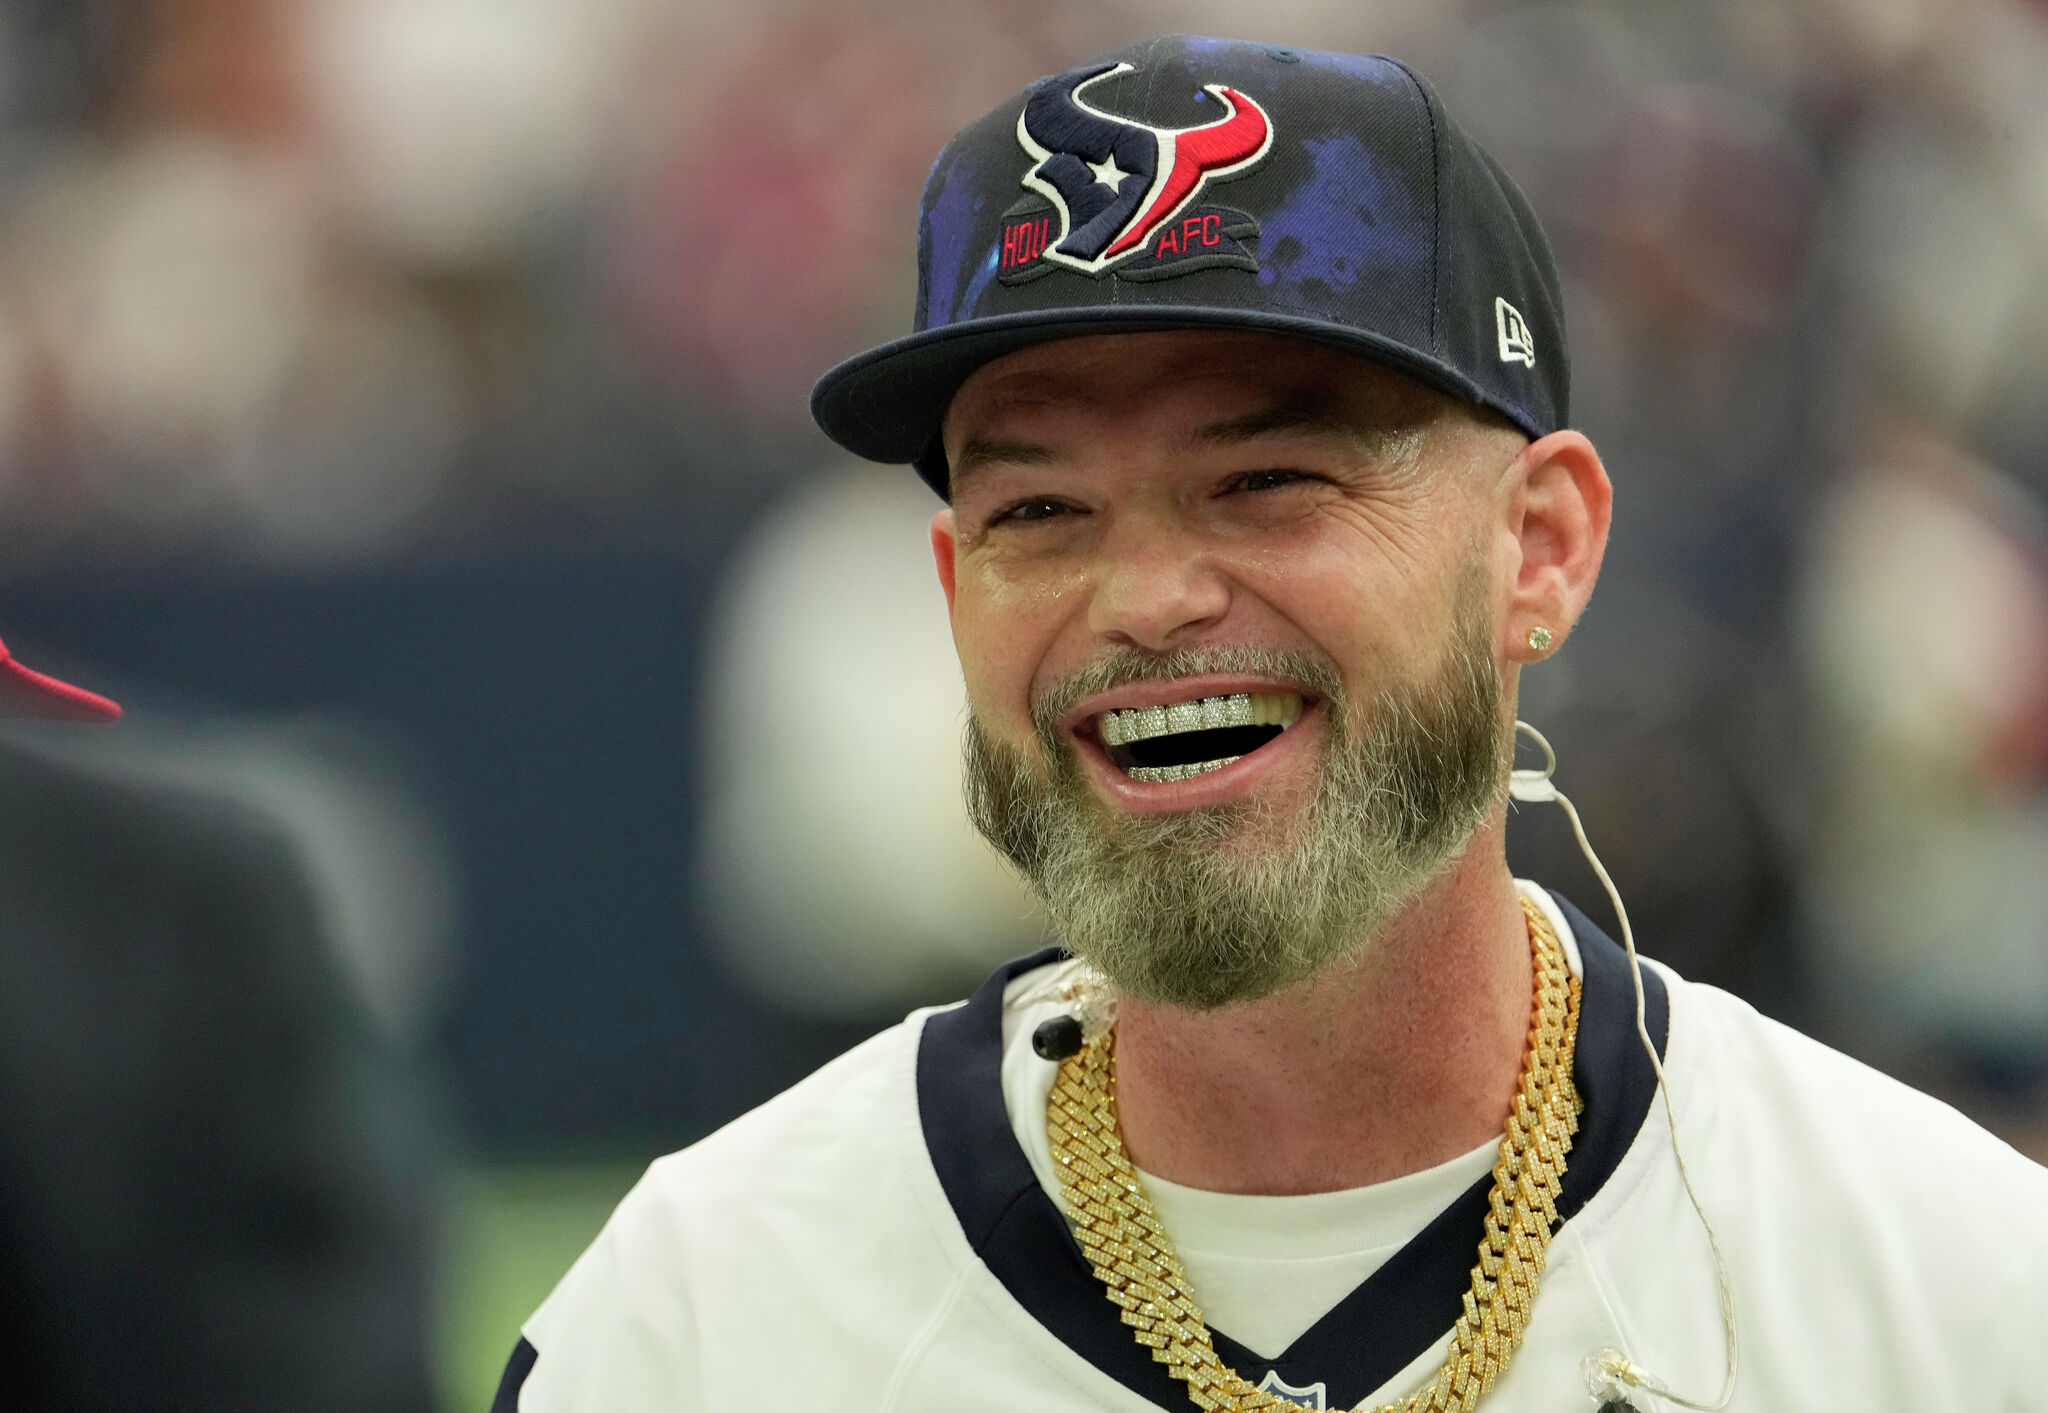 Paul Wall Changes Up His New Album With The Omission Of ‘Bounce, Rock, Skate’